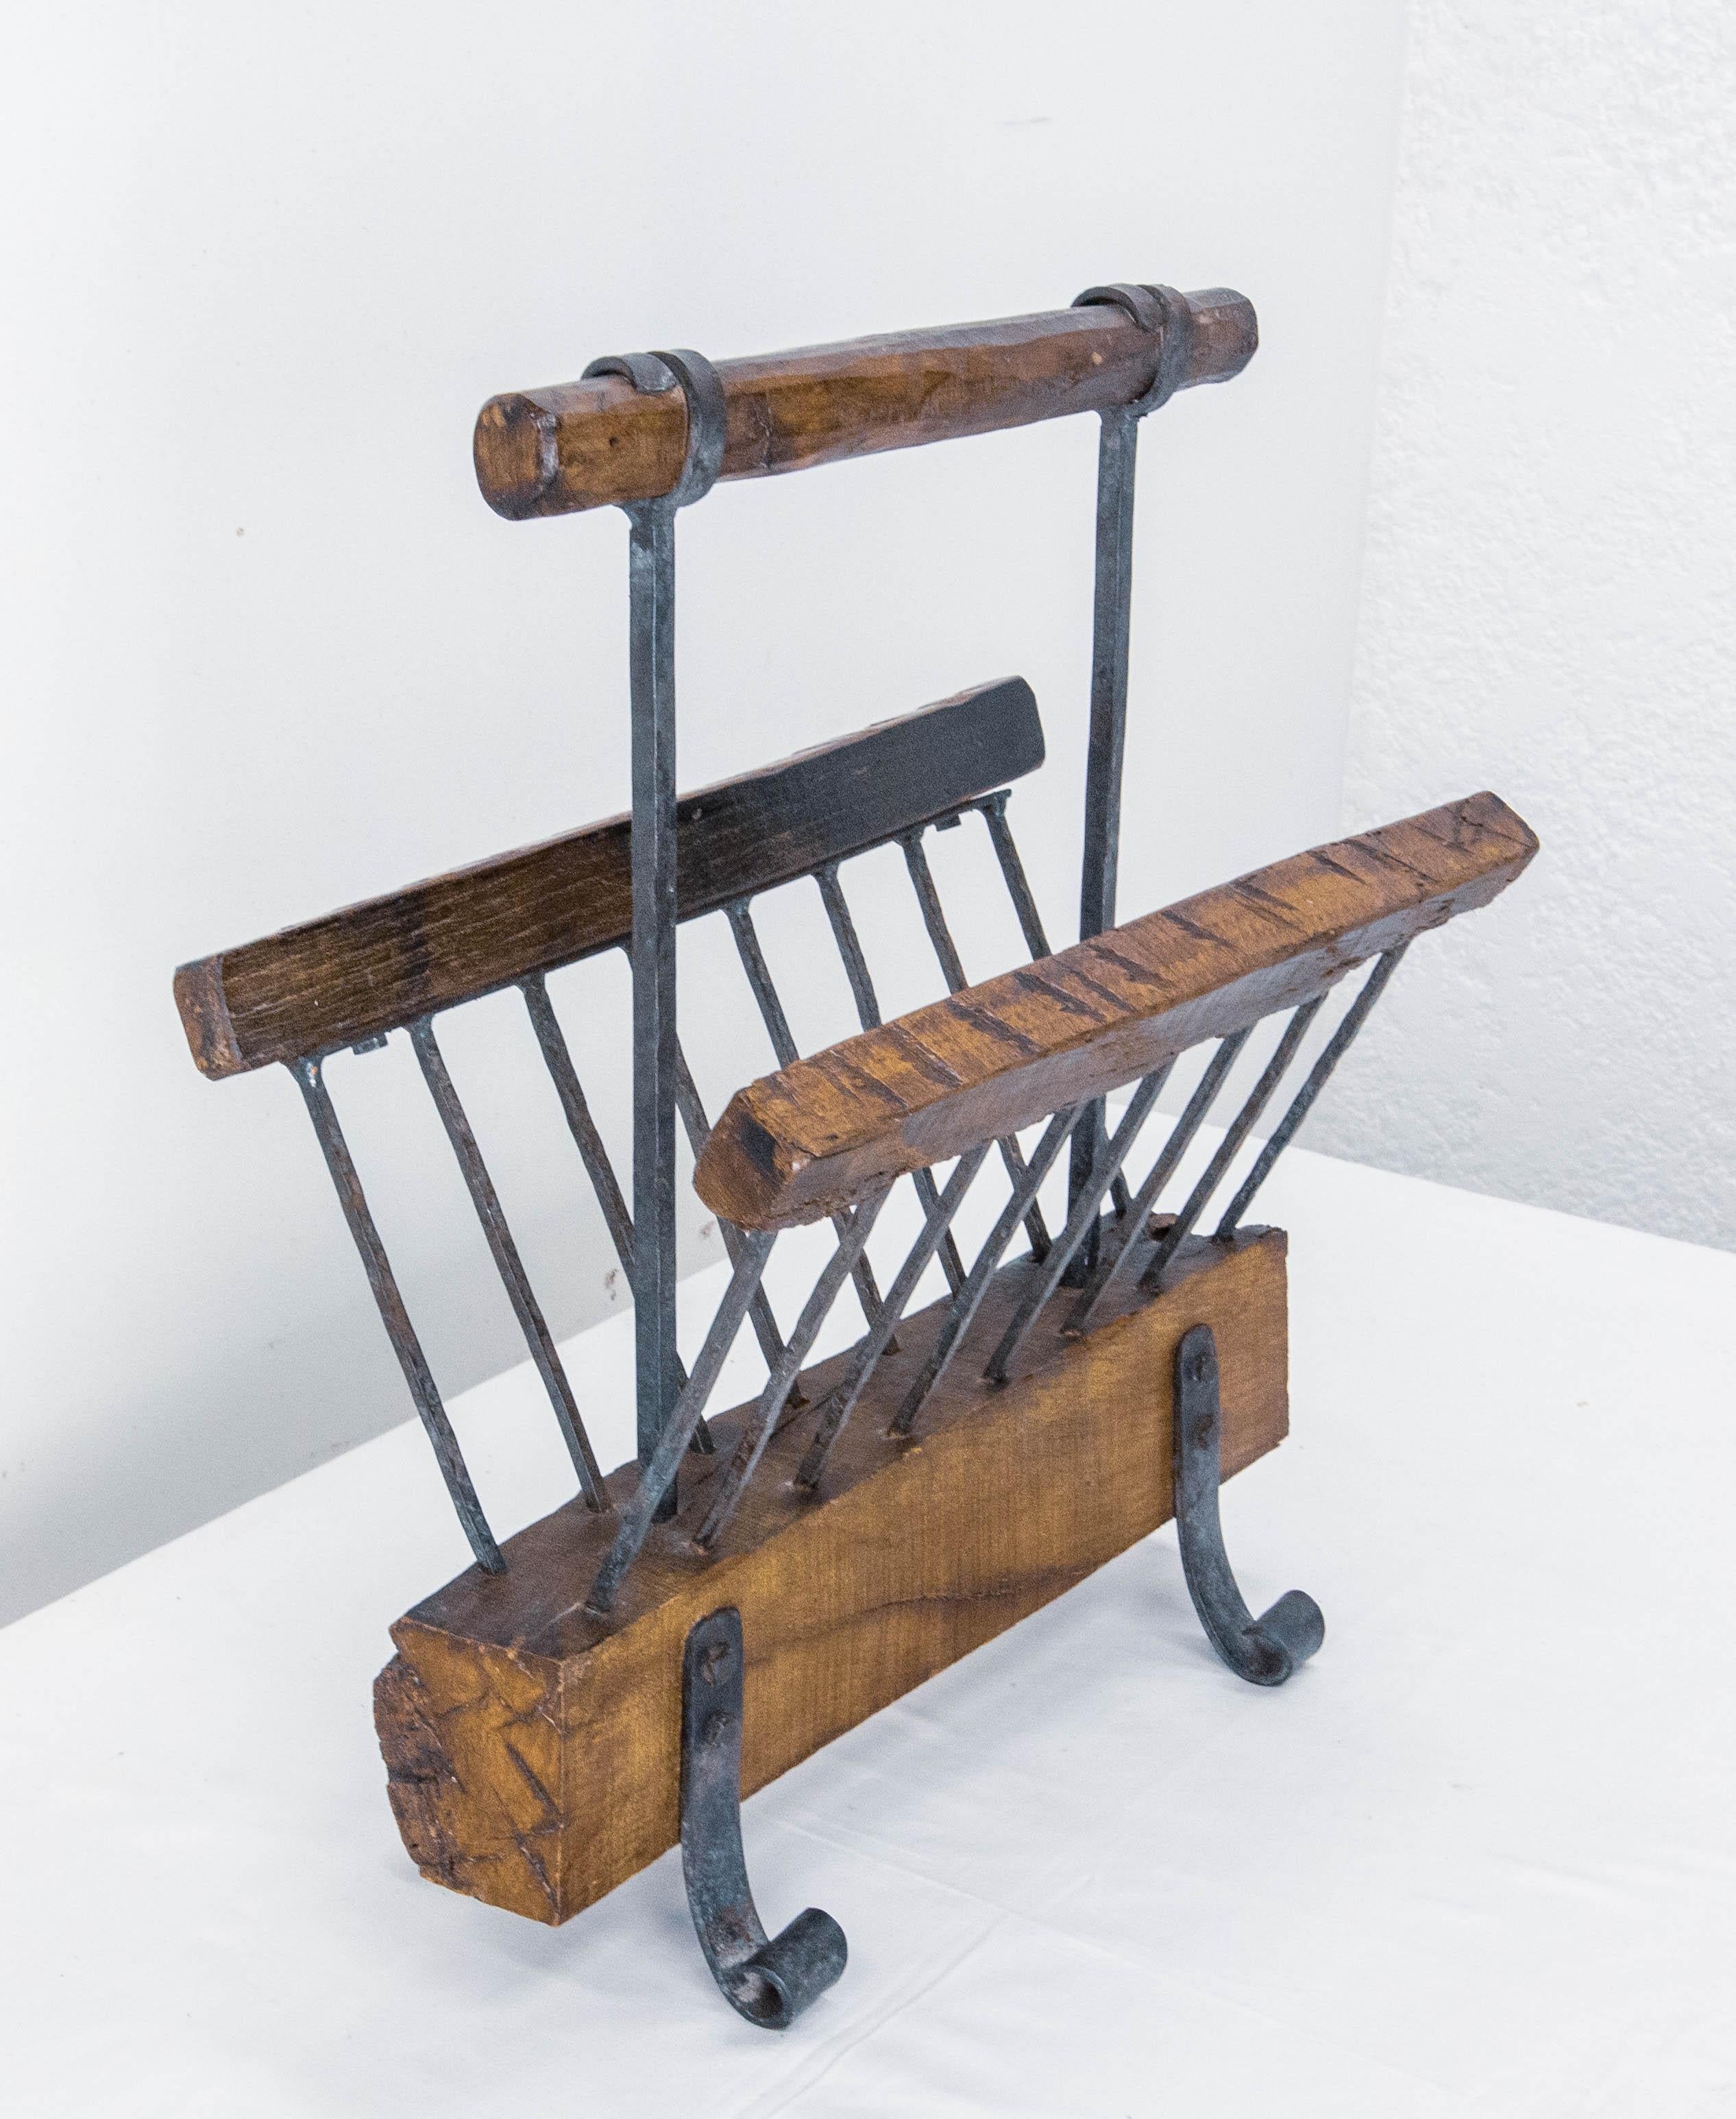 Mid-century magazine rack stand, circa 1960
French
Wrought iron and massive oak
Good condition

Shipping:
L 43.5 P24.5 H51.5 5.8 kg.